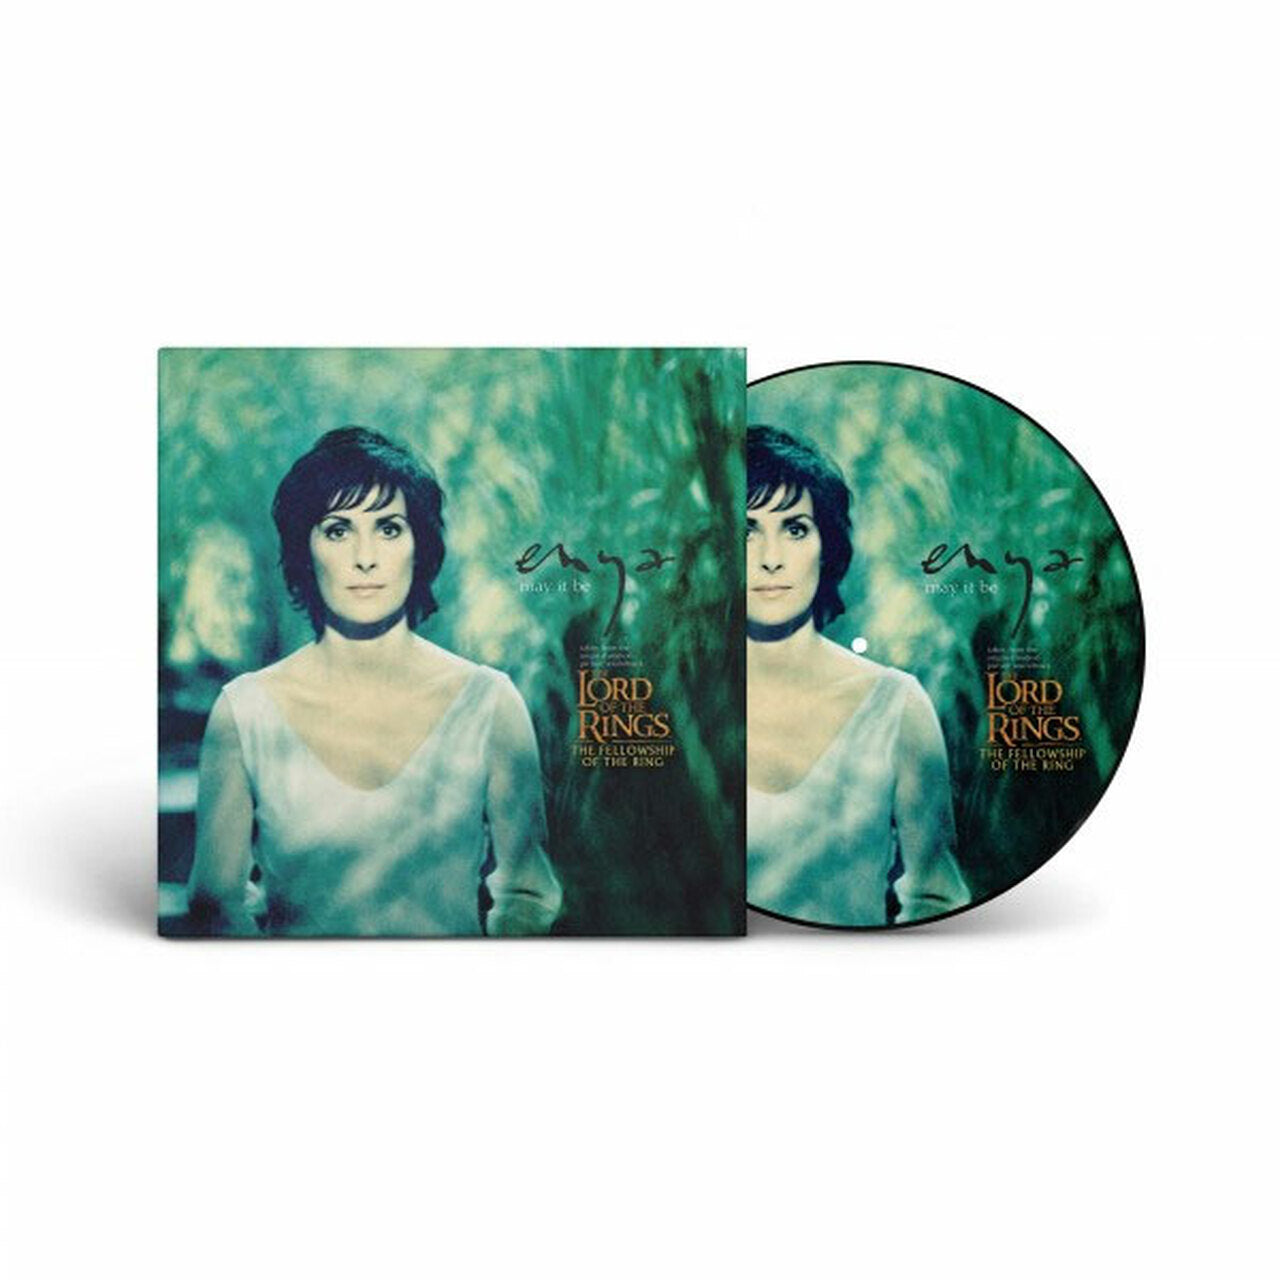 Enya May It Be 12" Vinyl (Picture Disc)